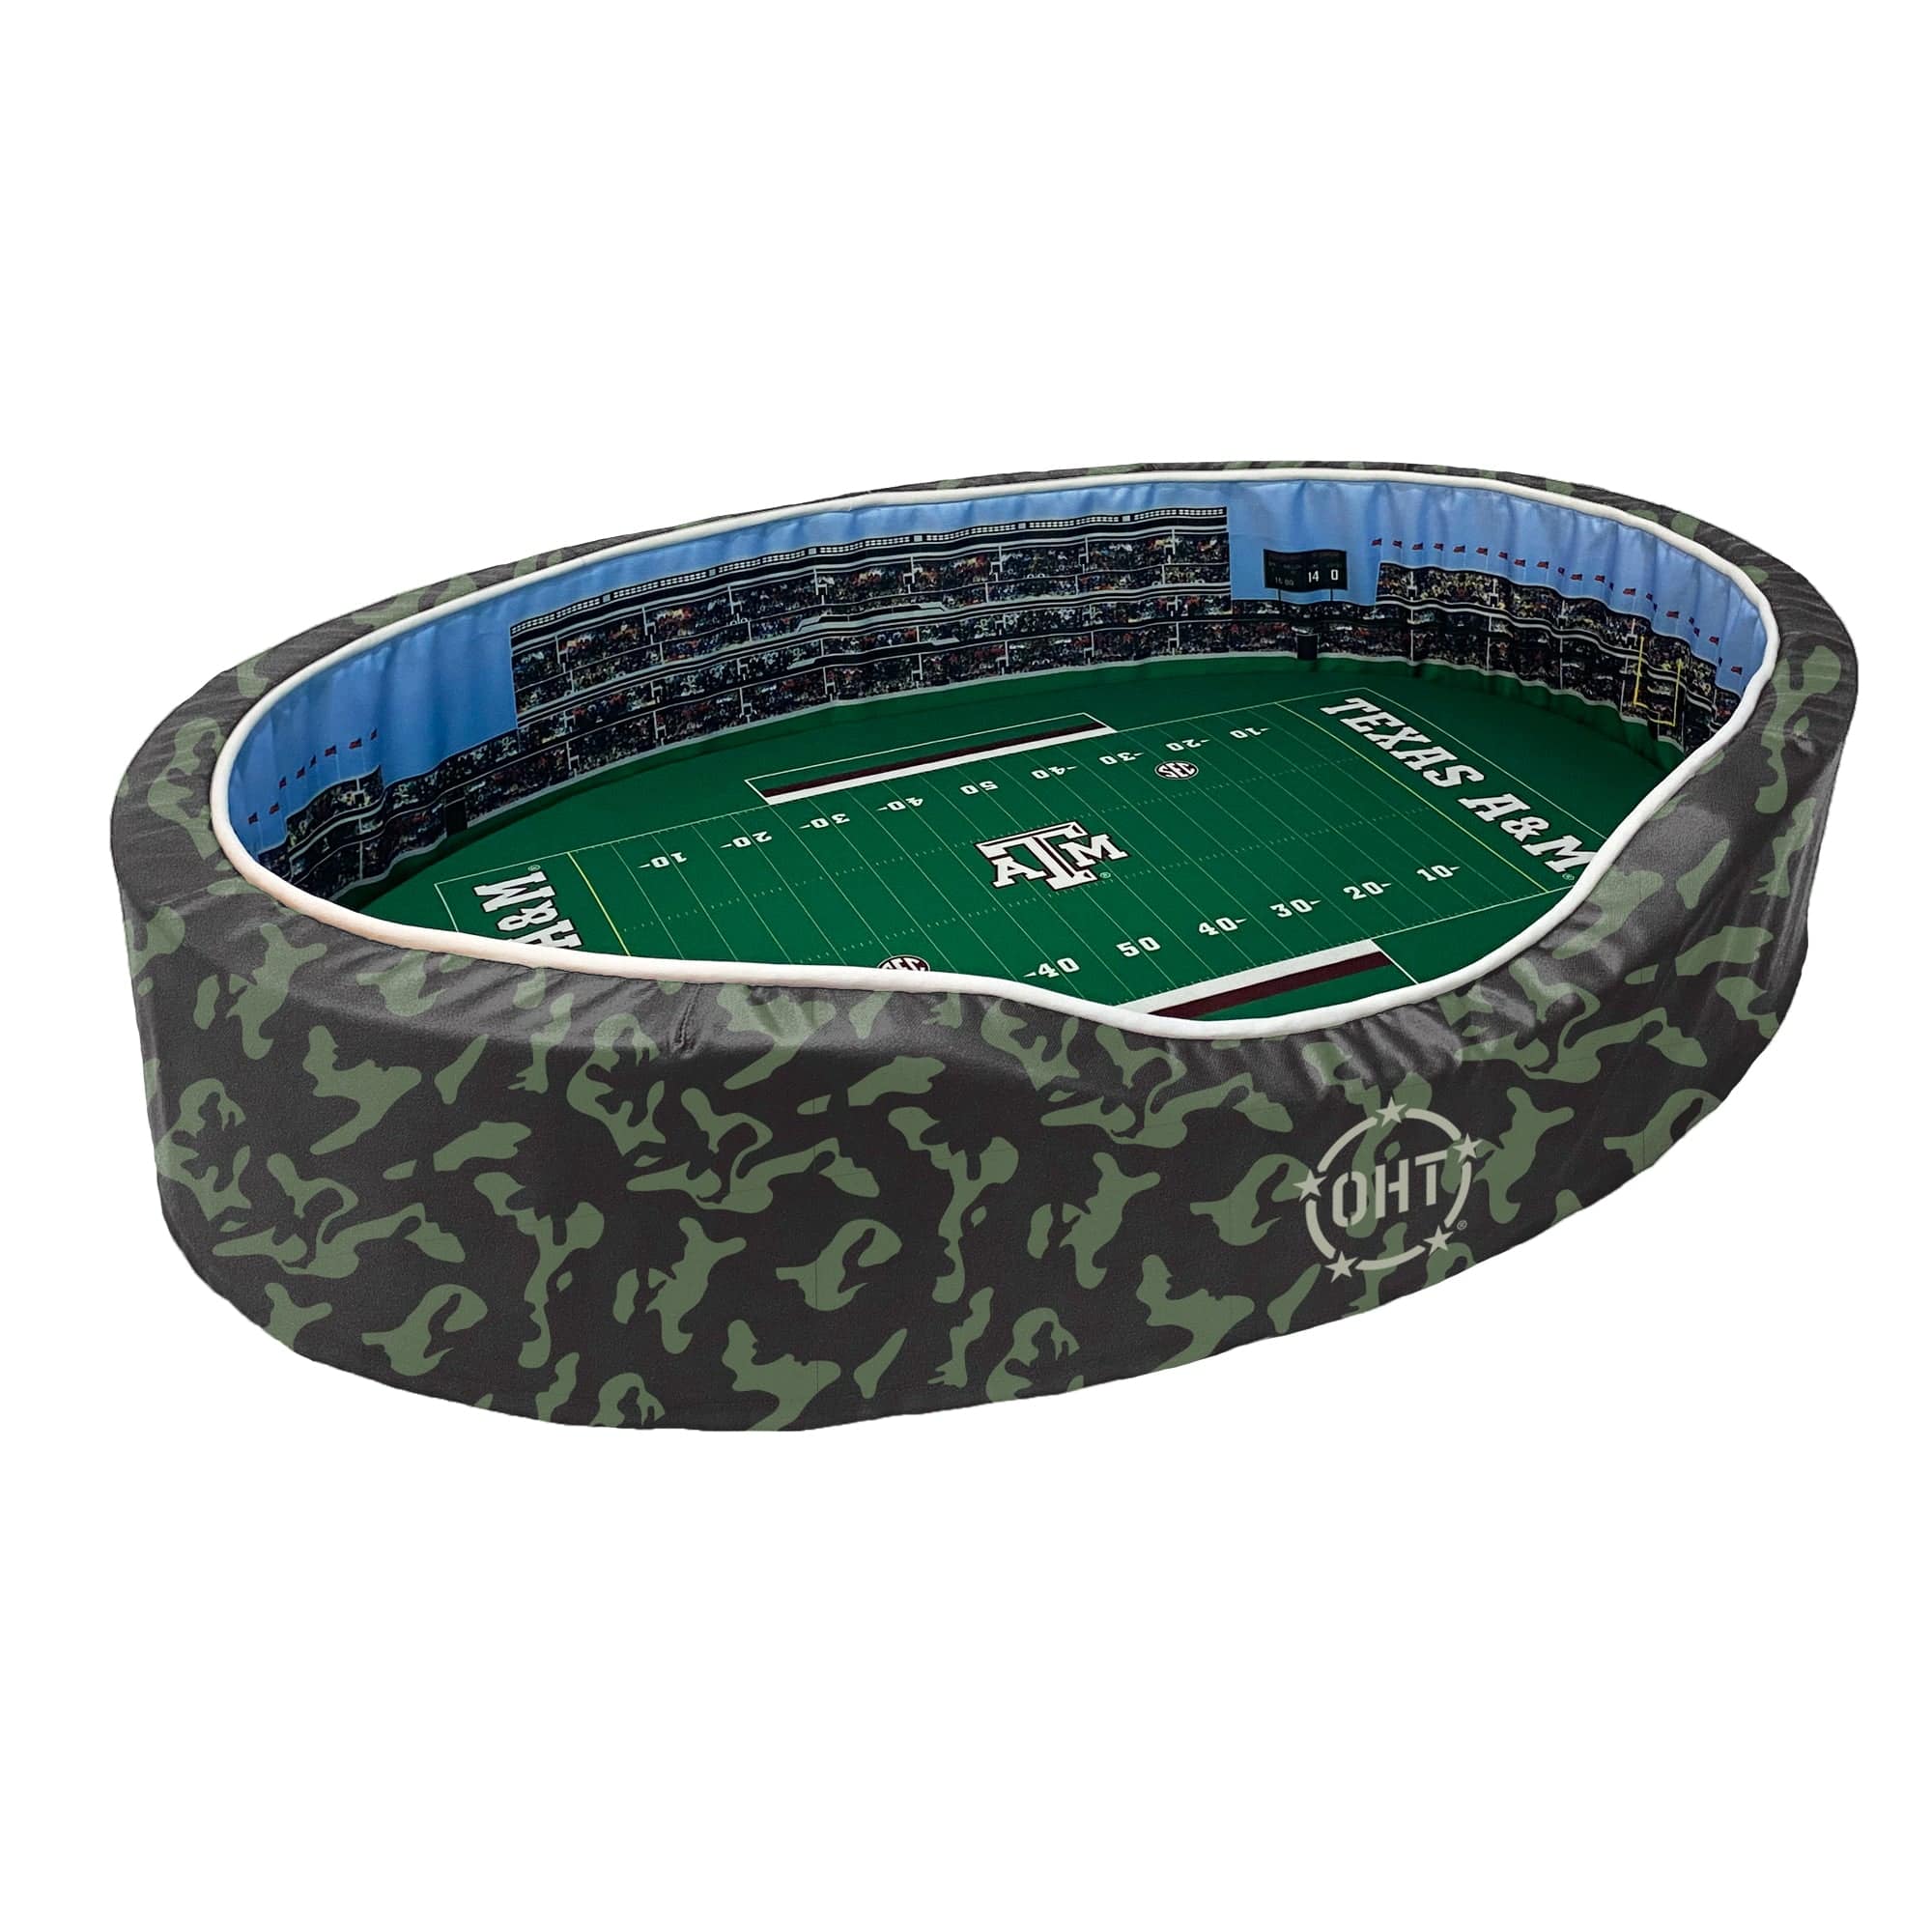 StadiumSpot Louisville Football Stadium Dog Bed - Authentic Cardinals  Graphics, Patented Design - Made from Durable, Eco-Friendly Materials -  Small